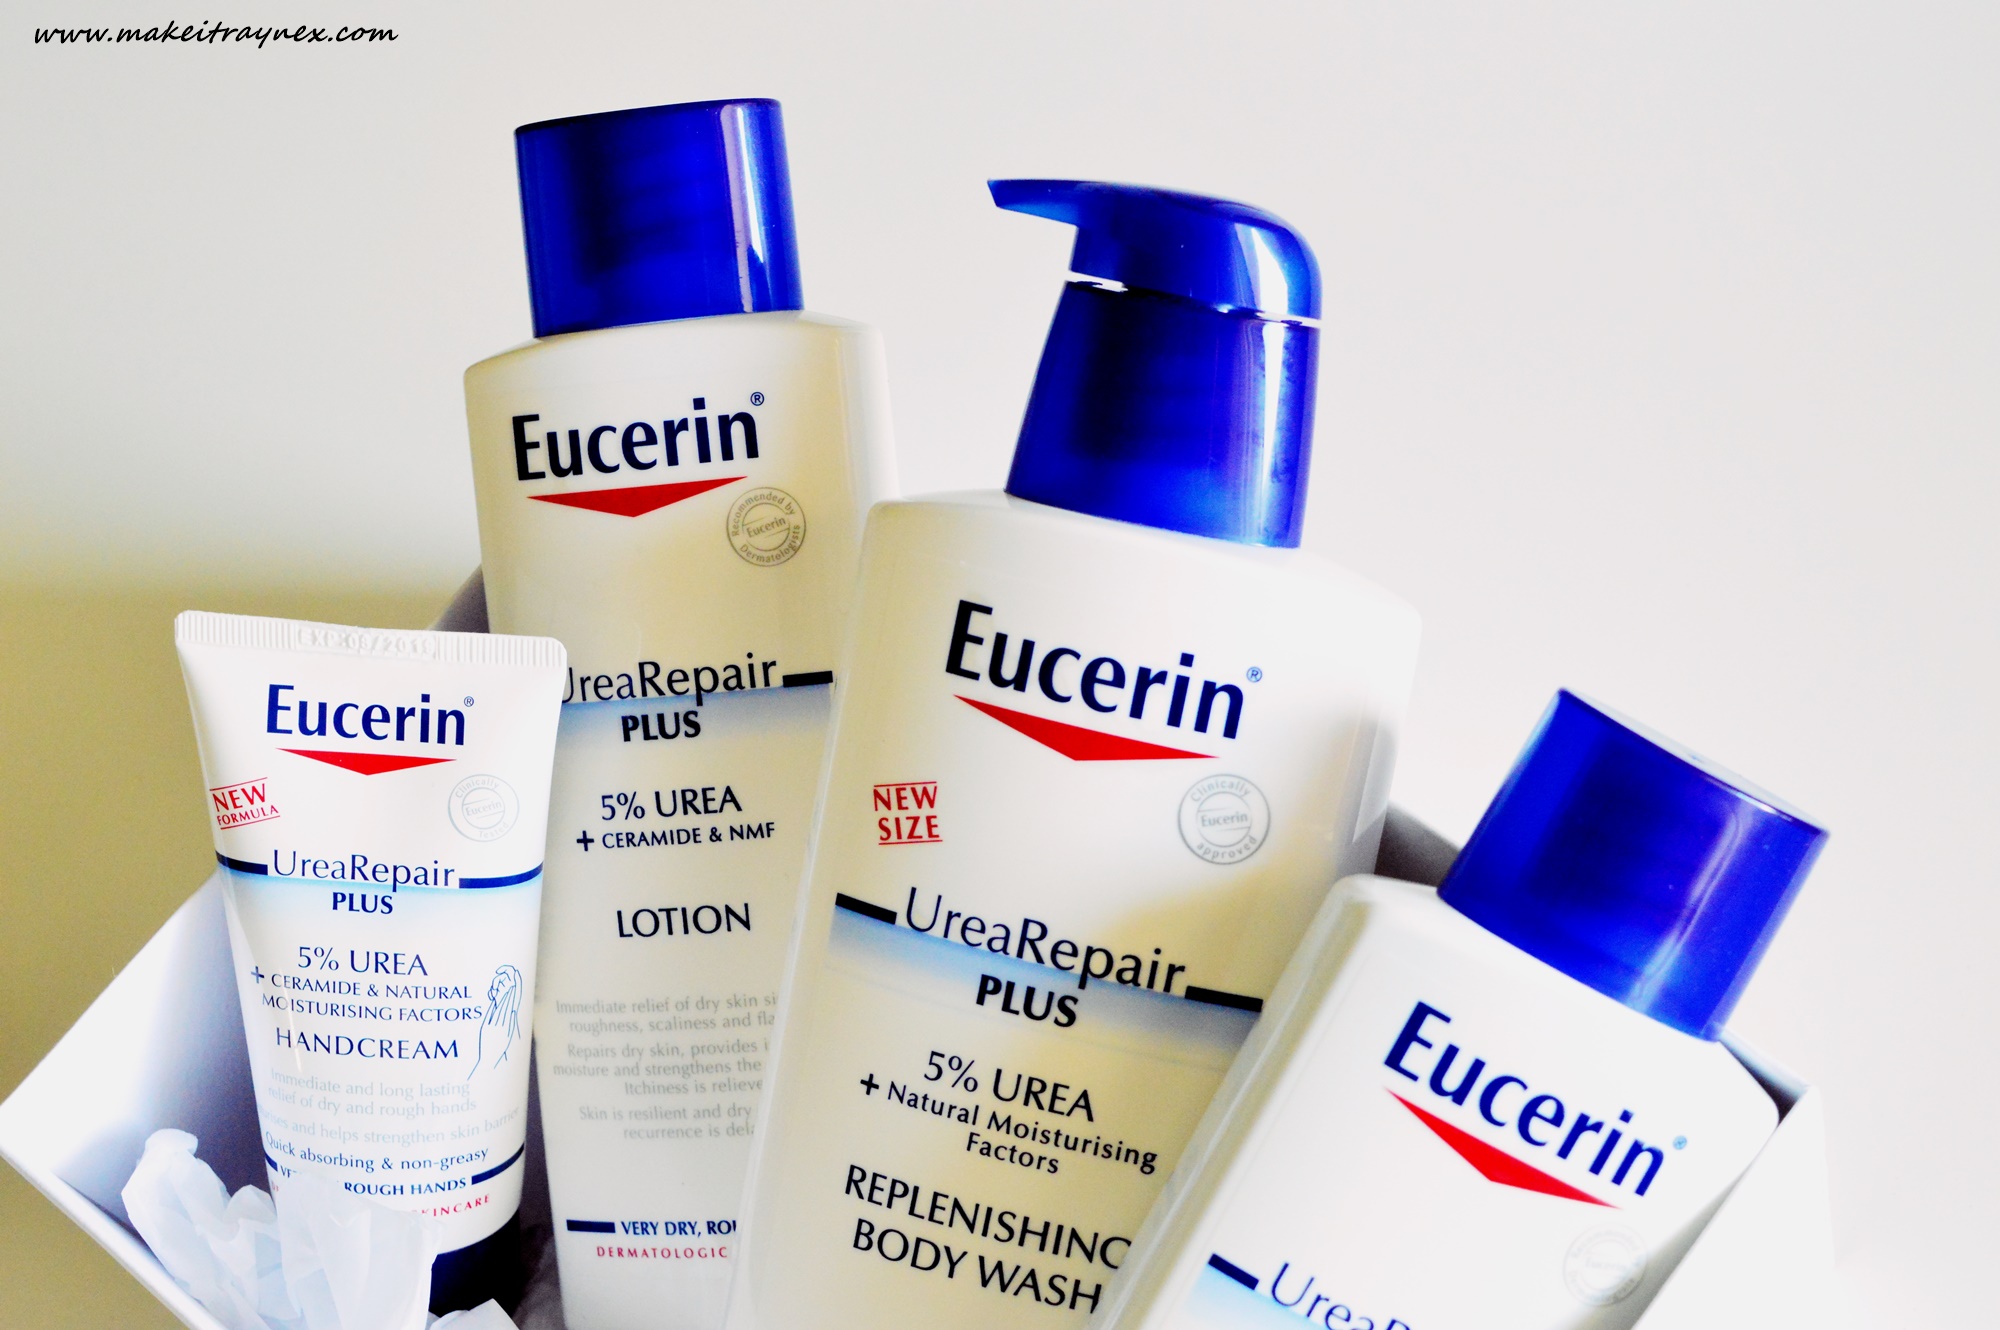 The UreaRepair PLUS range from Eucerin is back with new packaging, just in time for your Winter skin! {REVIEW}